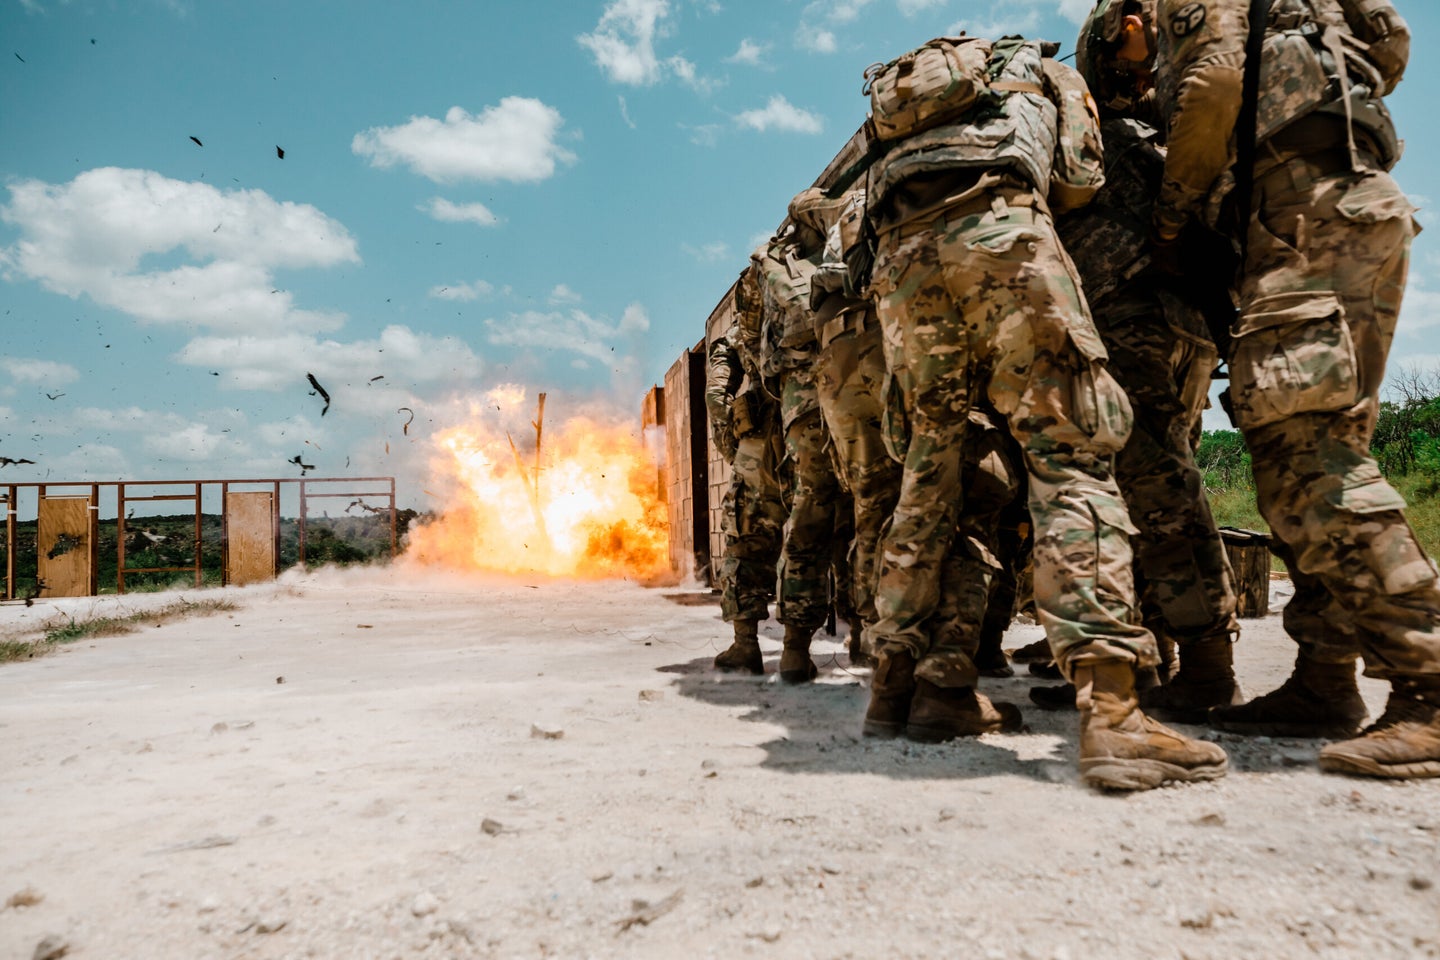 The physical and mental effects on troops exposed to blast overpressure from weapons are getting attention from the Army and Congress. (Photo by U.S. Army, Staff Sgt. Arturo Guzman)